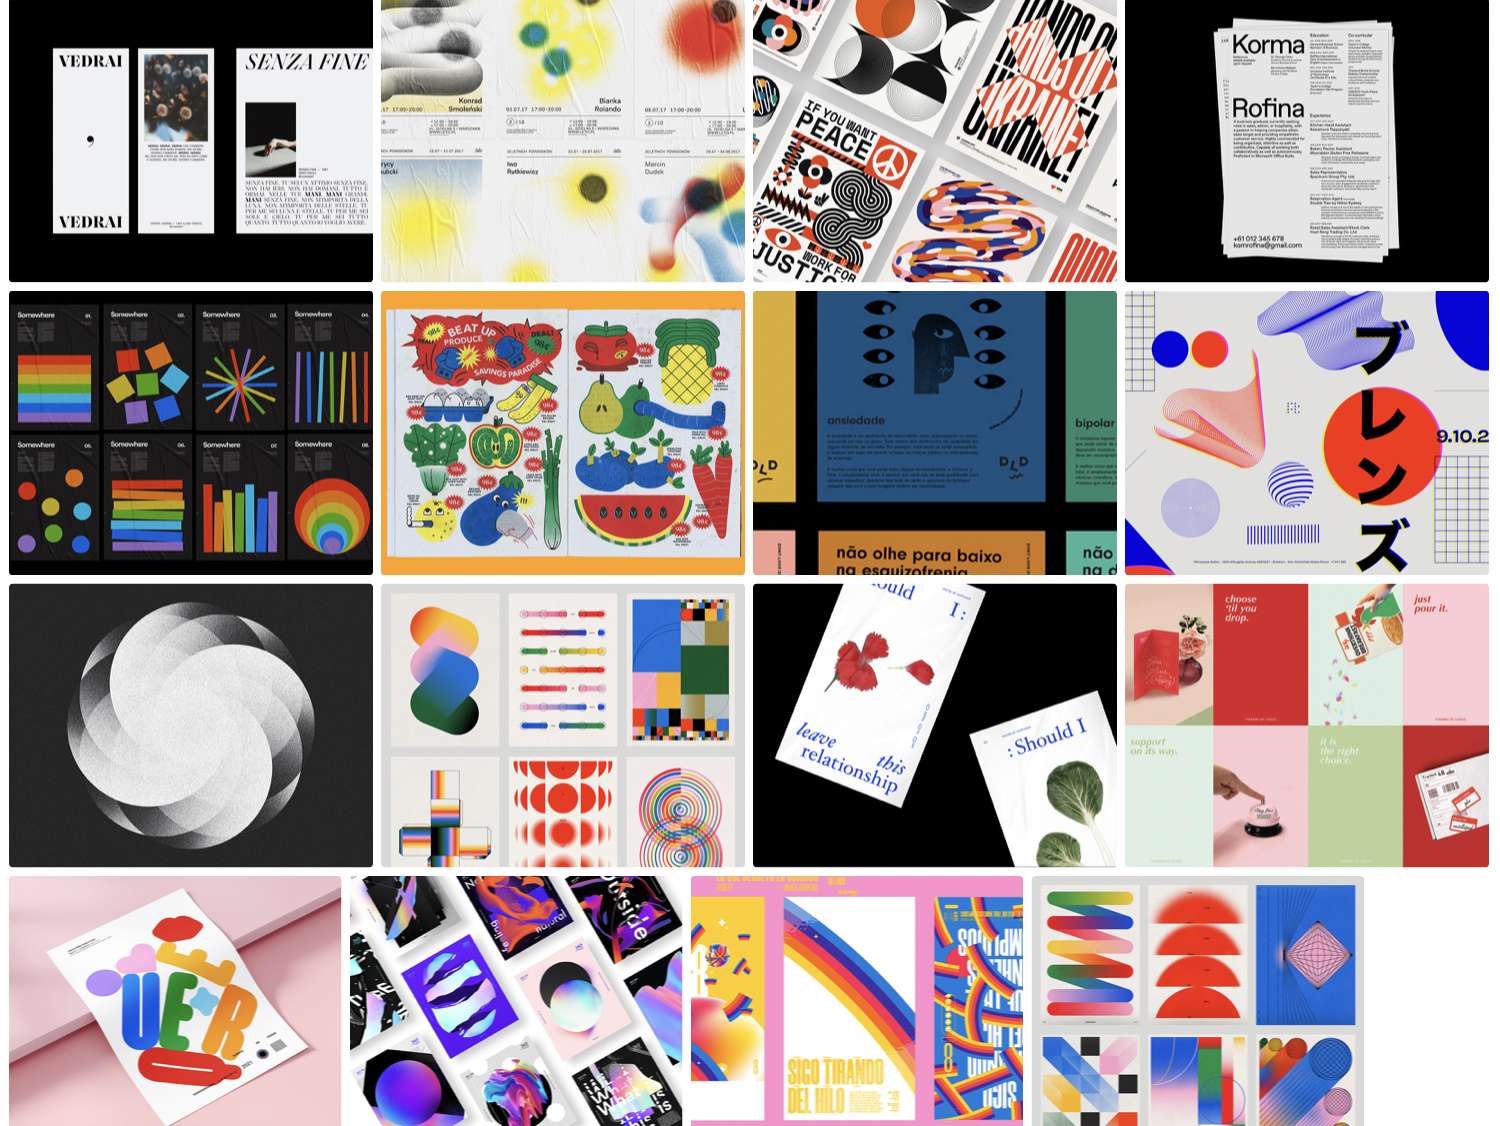 Mood board showing images of bright, graphic, abstract posters art